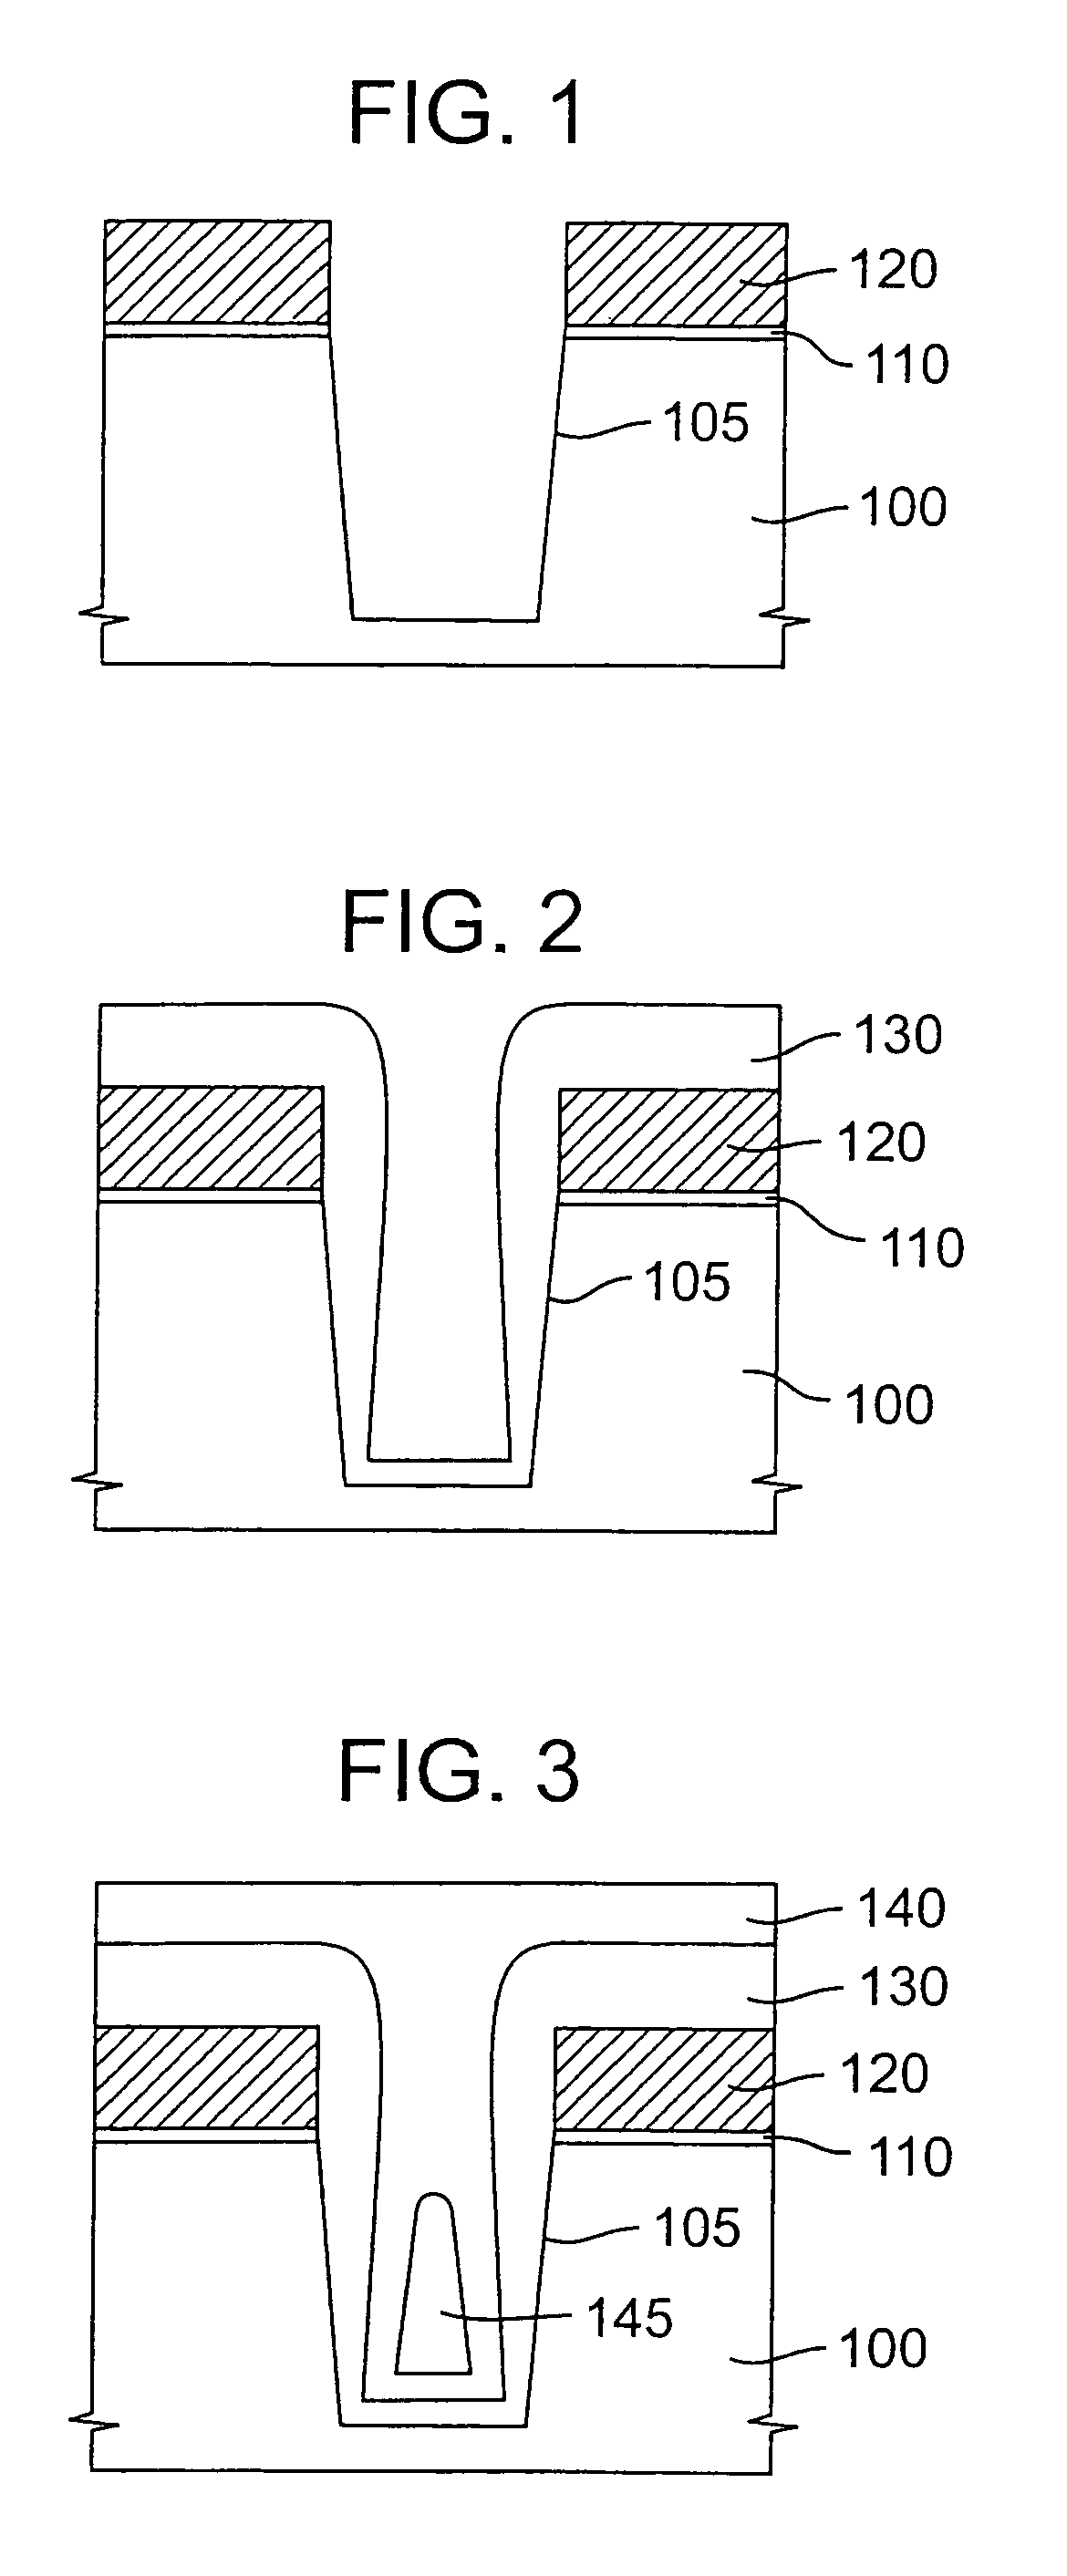 Stress-relieved shallow trench isolation (STI) structure and method for forming the same